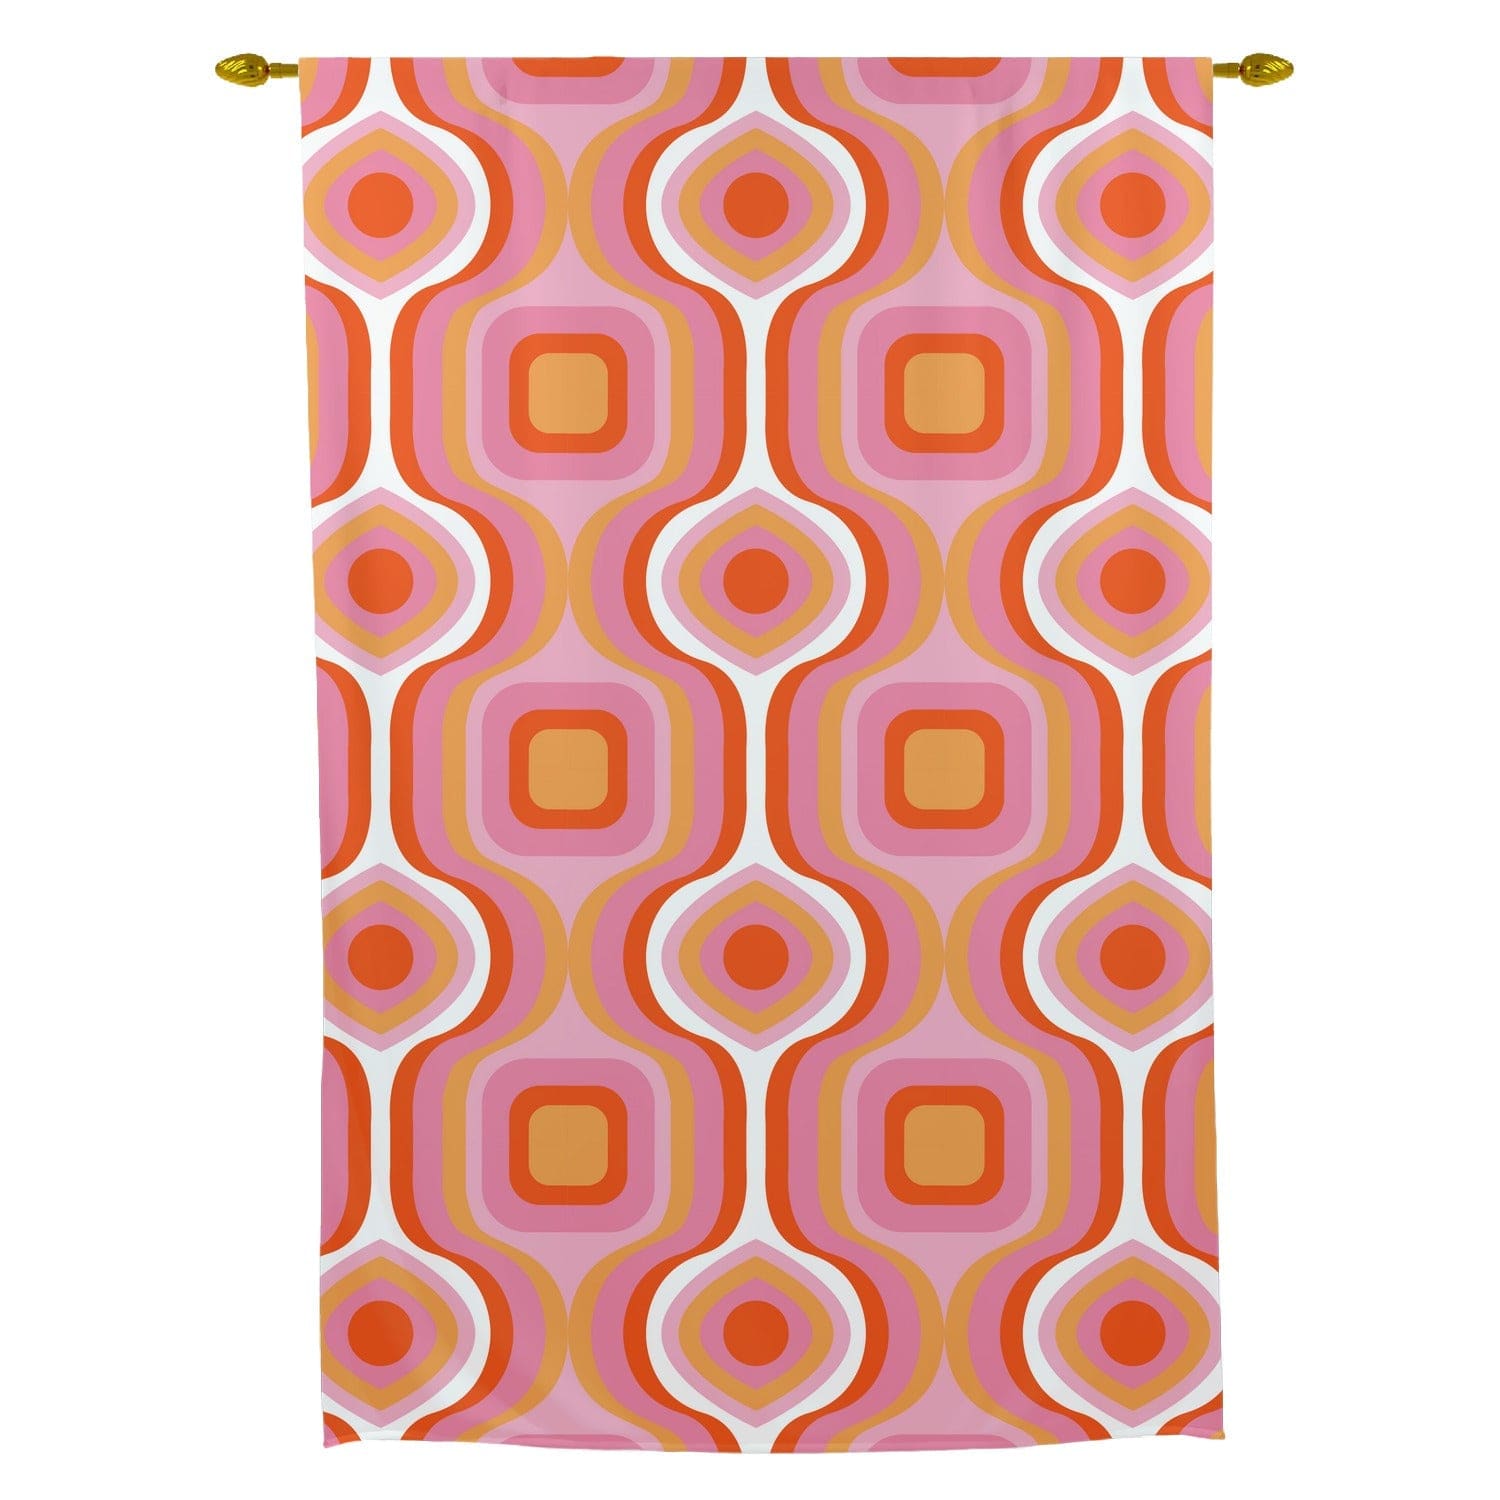 Retro Mid Mod, Pink, Yellow, White, Abstract Groovy, Mid Century Modern Tie Up curtain Curtains